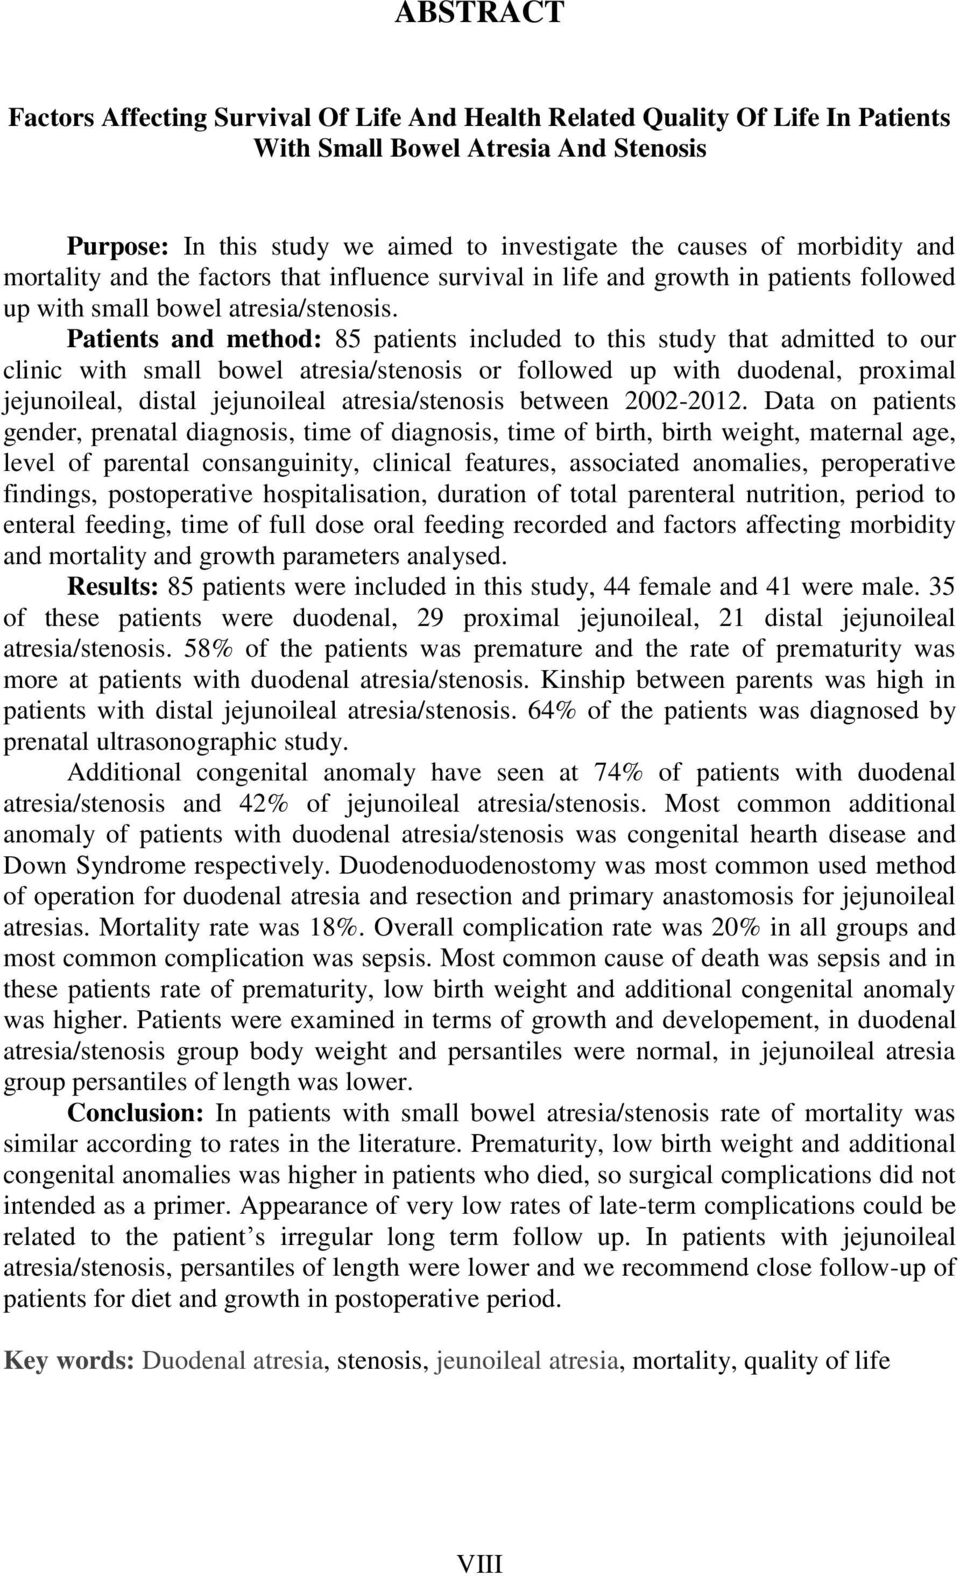 Patients and method: 85 patients included to this study that admitted to our clinic with small bowel atresia/stenosis or followed up with duodenal, proximal jejunoileal, distal jejunoileal